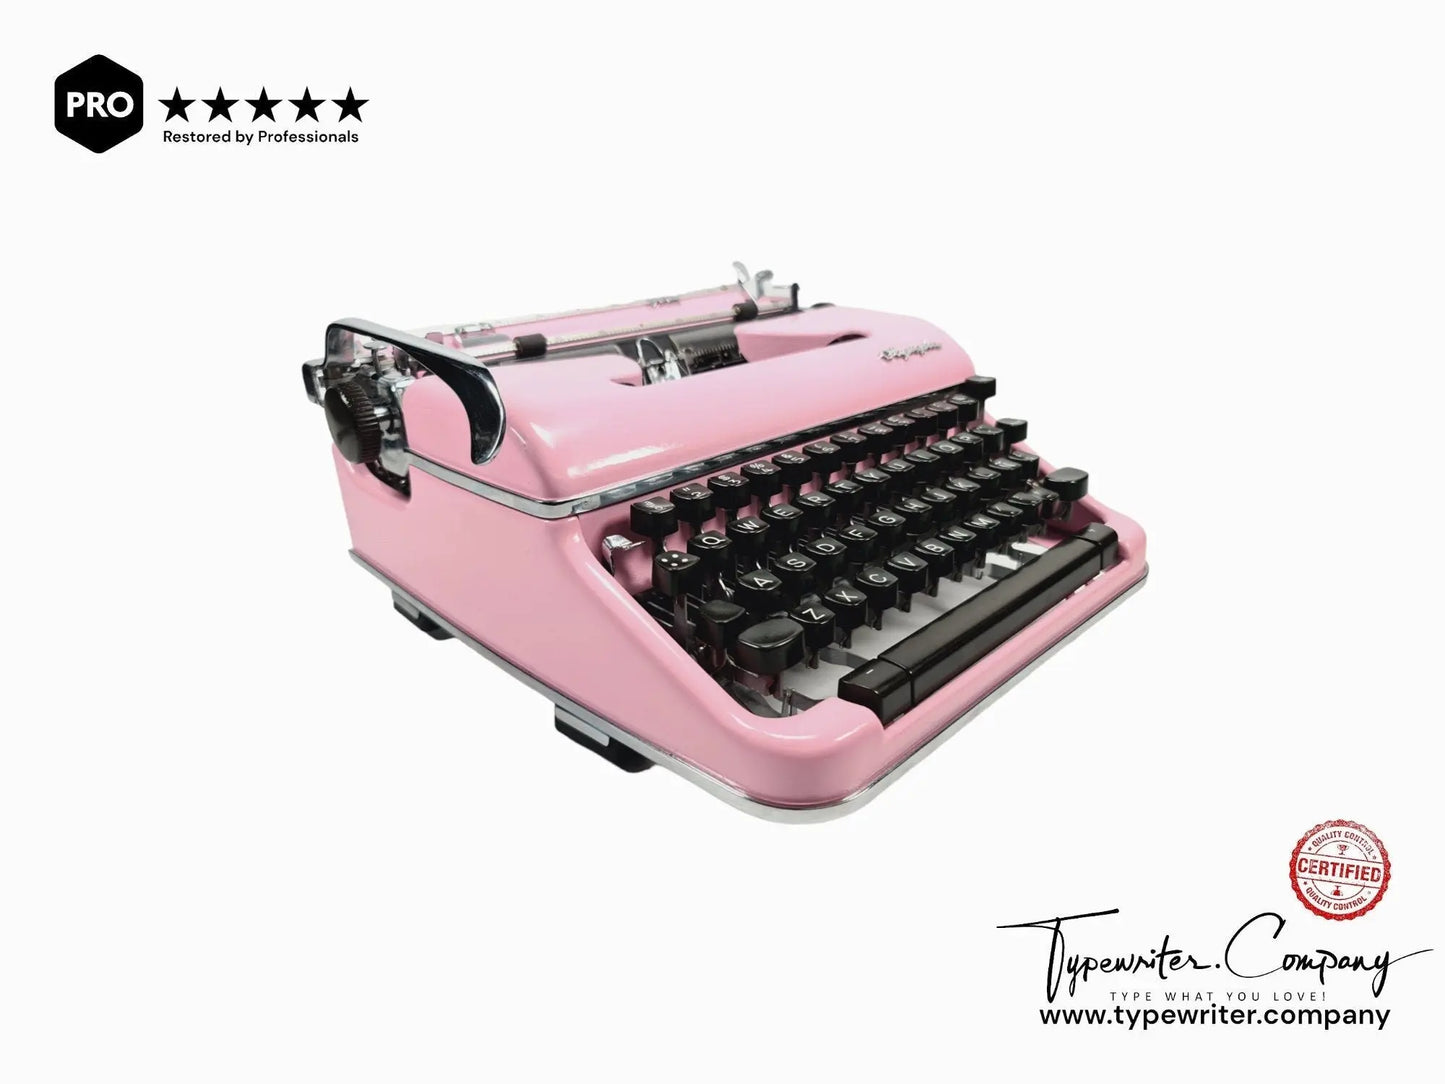 Limited Edition Olimpia SM4 Pink Typewriter, Vintage, Mint Condition, Manual Portable, Professionally Serviced by Typewriter.Company - ElGranero Typewriter.Company